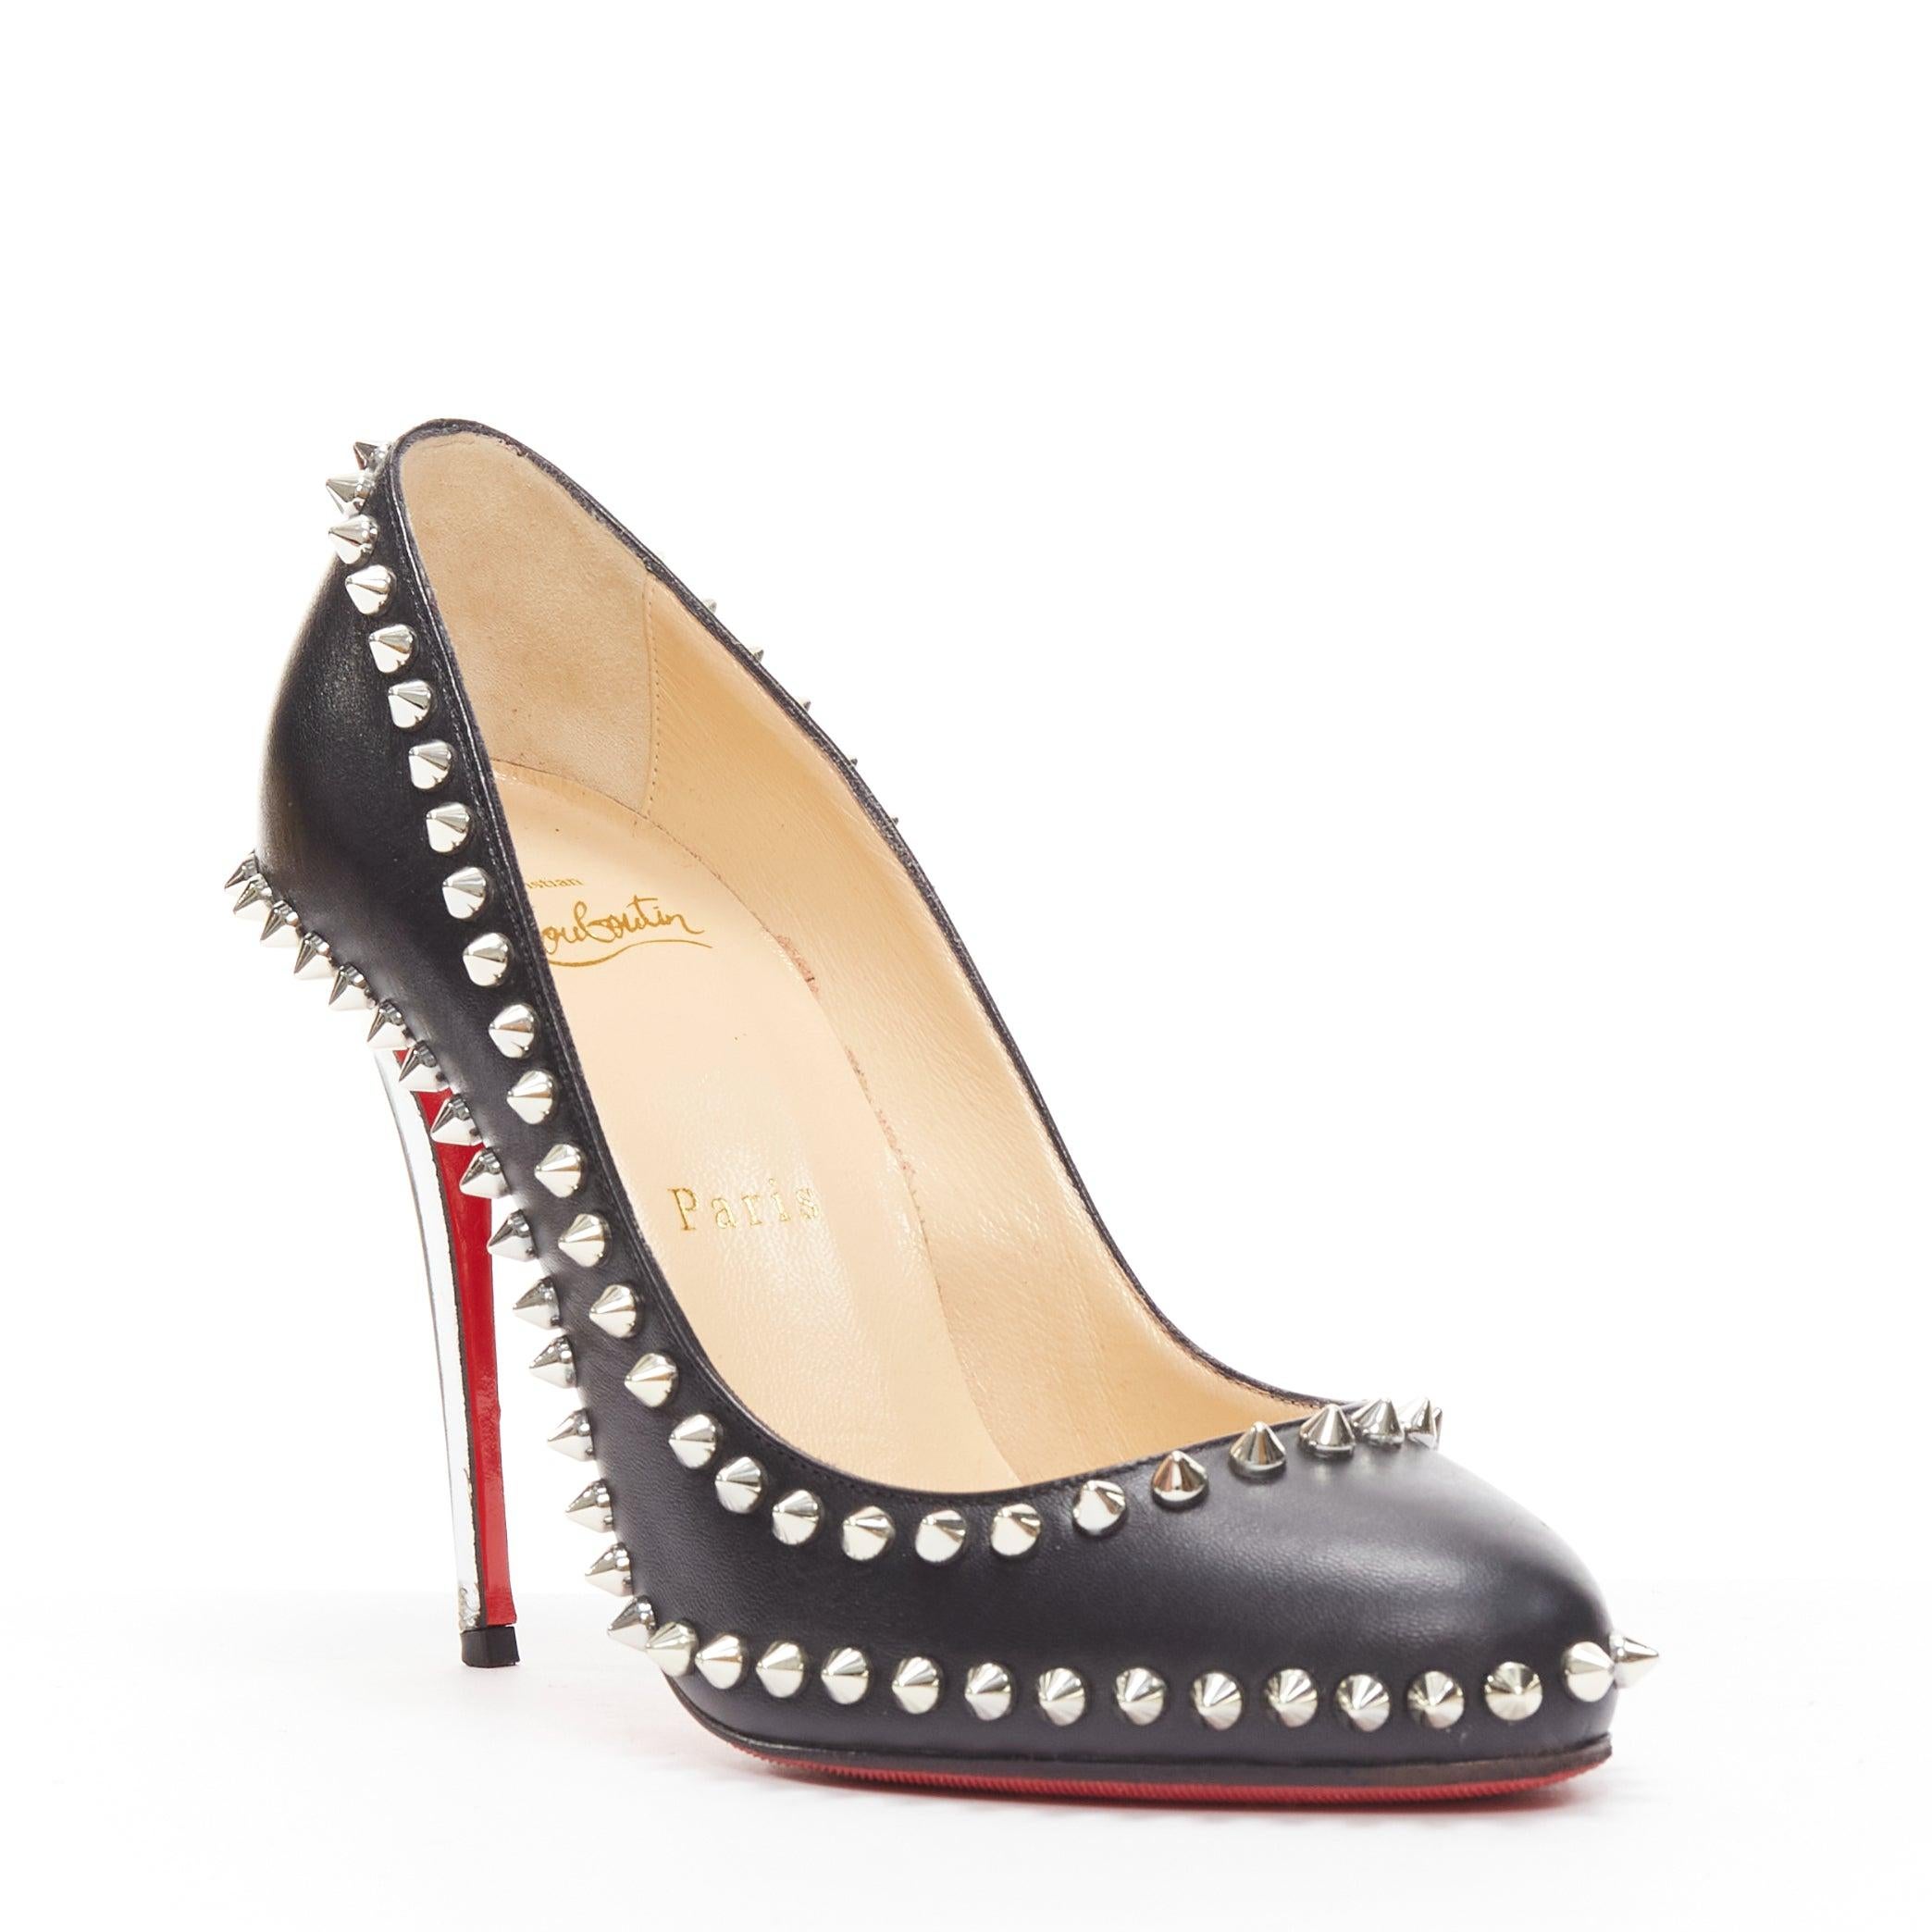 CHRISTIAN LOUBOUTIN Dorispiky black silver punk spike stud round pump EU36.5
Reference: TGAS/D00989
Brand: Christian Louboutin
Model: Dorispiky
Material: Leather, Metal
Color: Black, Silver
Pattern: Solid
Lining: Brown Leather
Extra Details: Almond